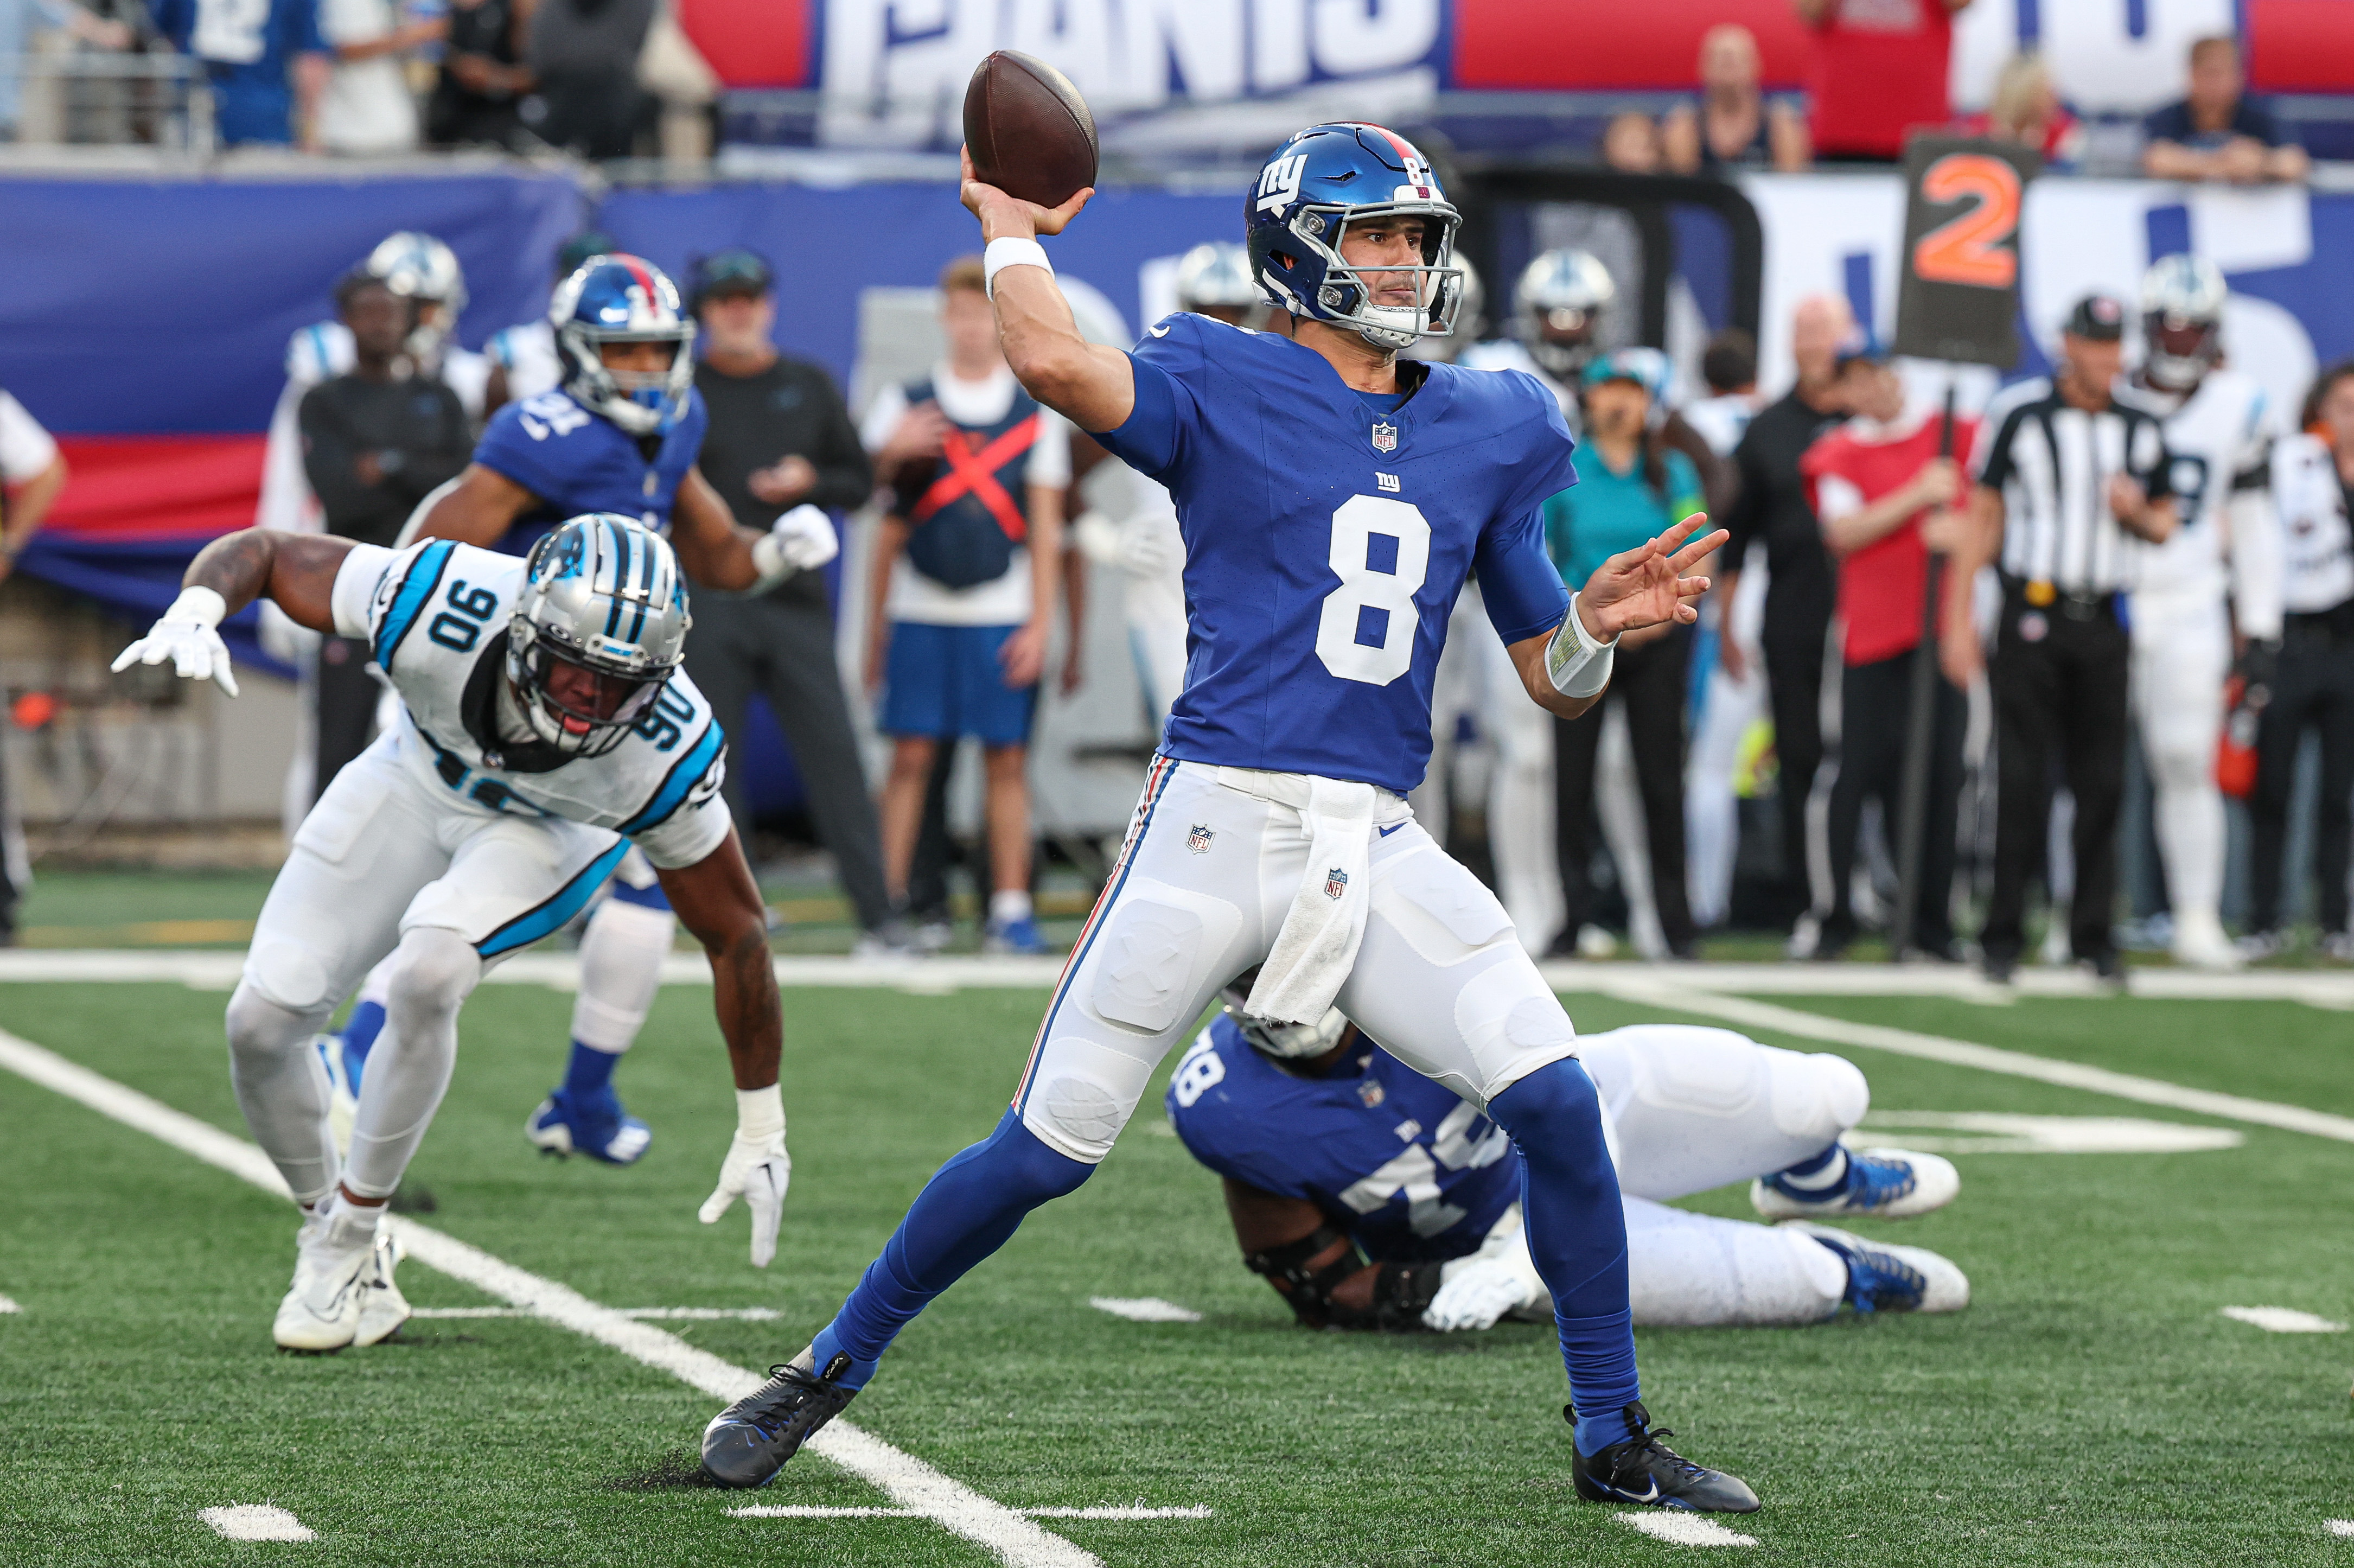 Giants will face Panthers in historic Germany matchup this season